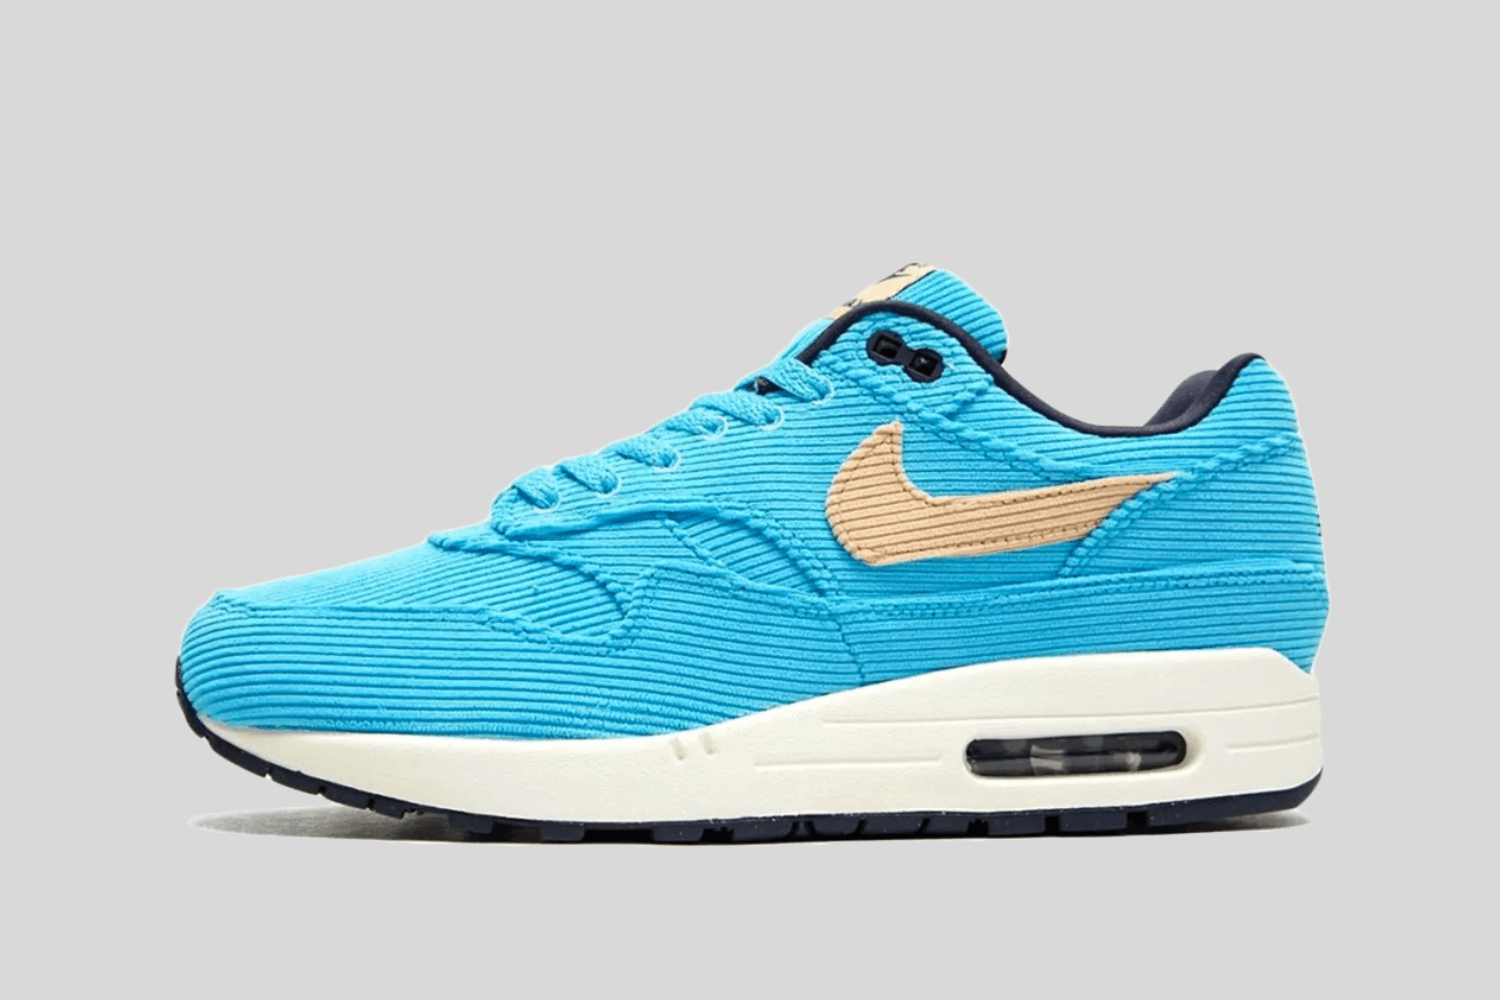 The Nike Air Max 1 Corduroy 'Baltic Blue' is expected in 2023